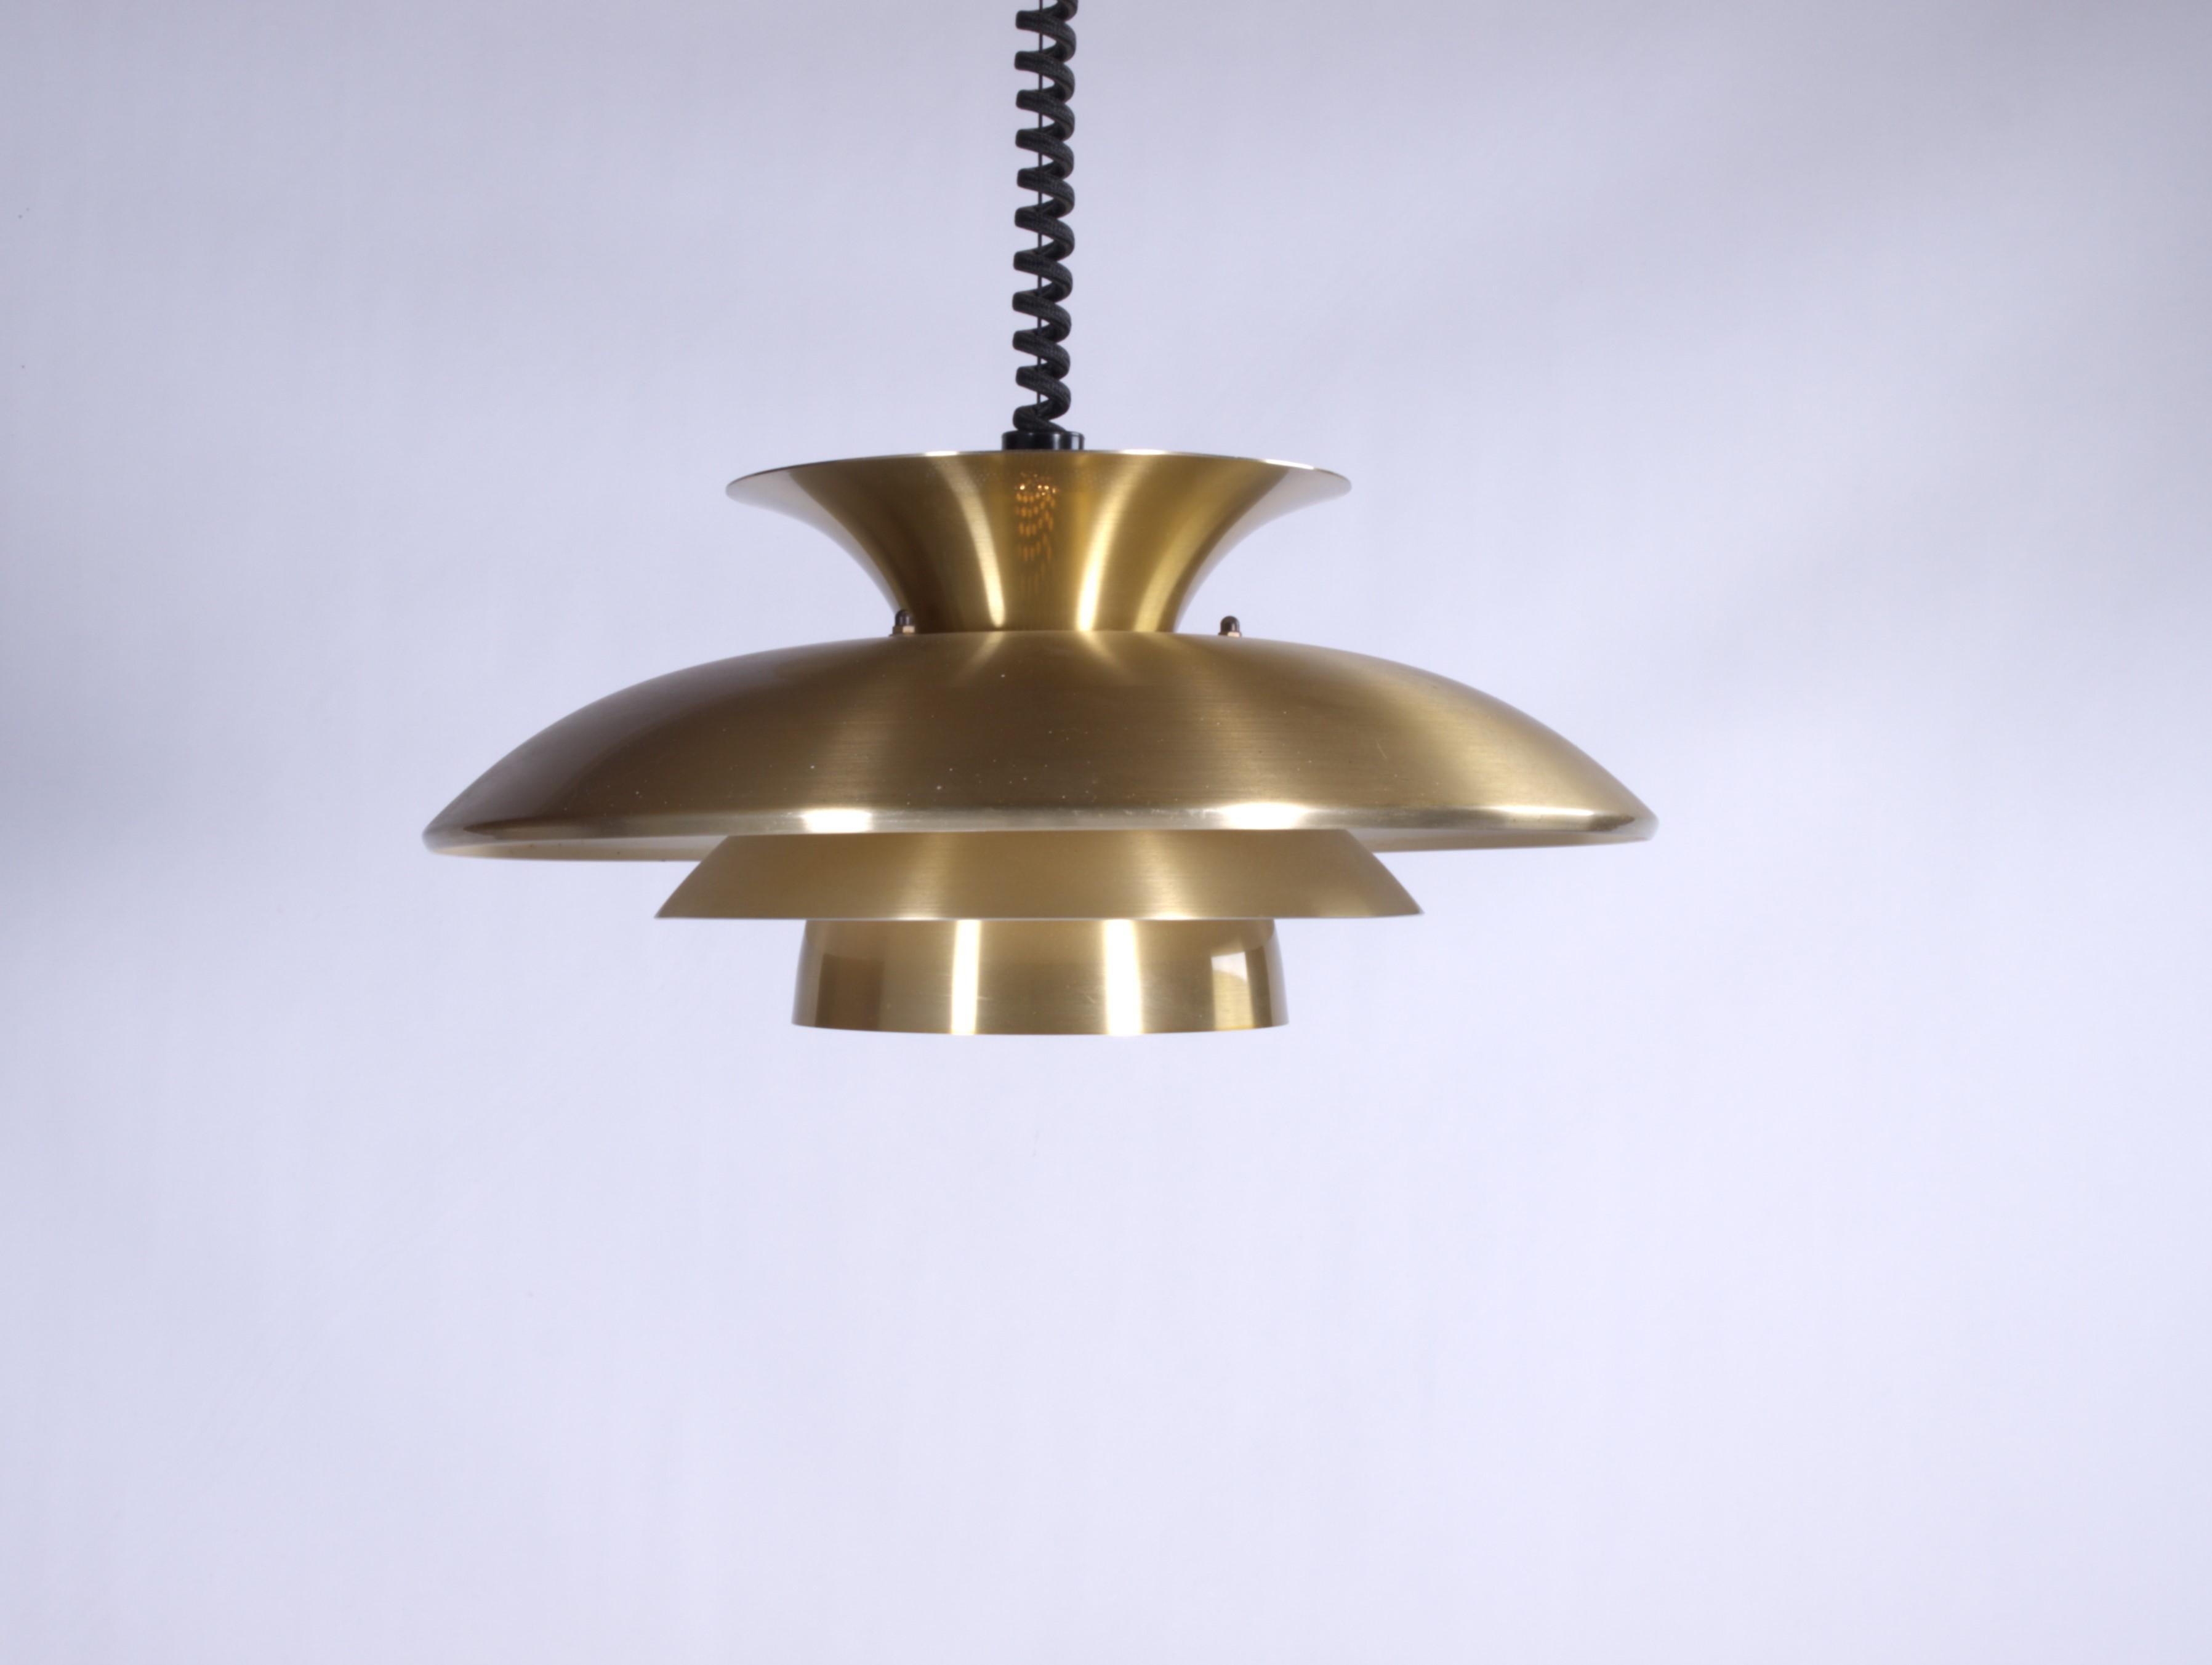 Introducing the Belux Aida pendant lamp in brass-colored shades with white interiors, reminiscent of the iconic PH lamps by Louis Poulsen. This Danish vintage lamp from the 1970s is in excellent condition, with no dents or deformations.

With a